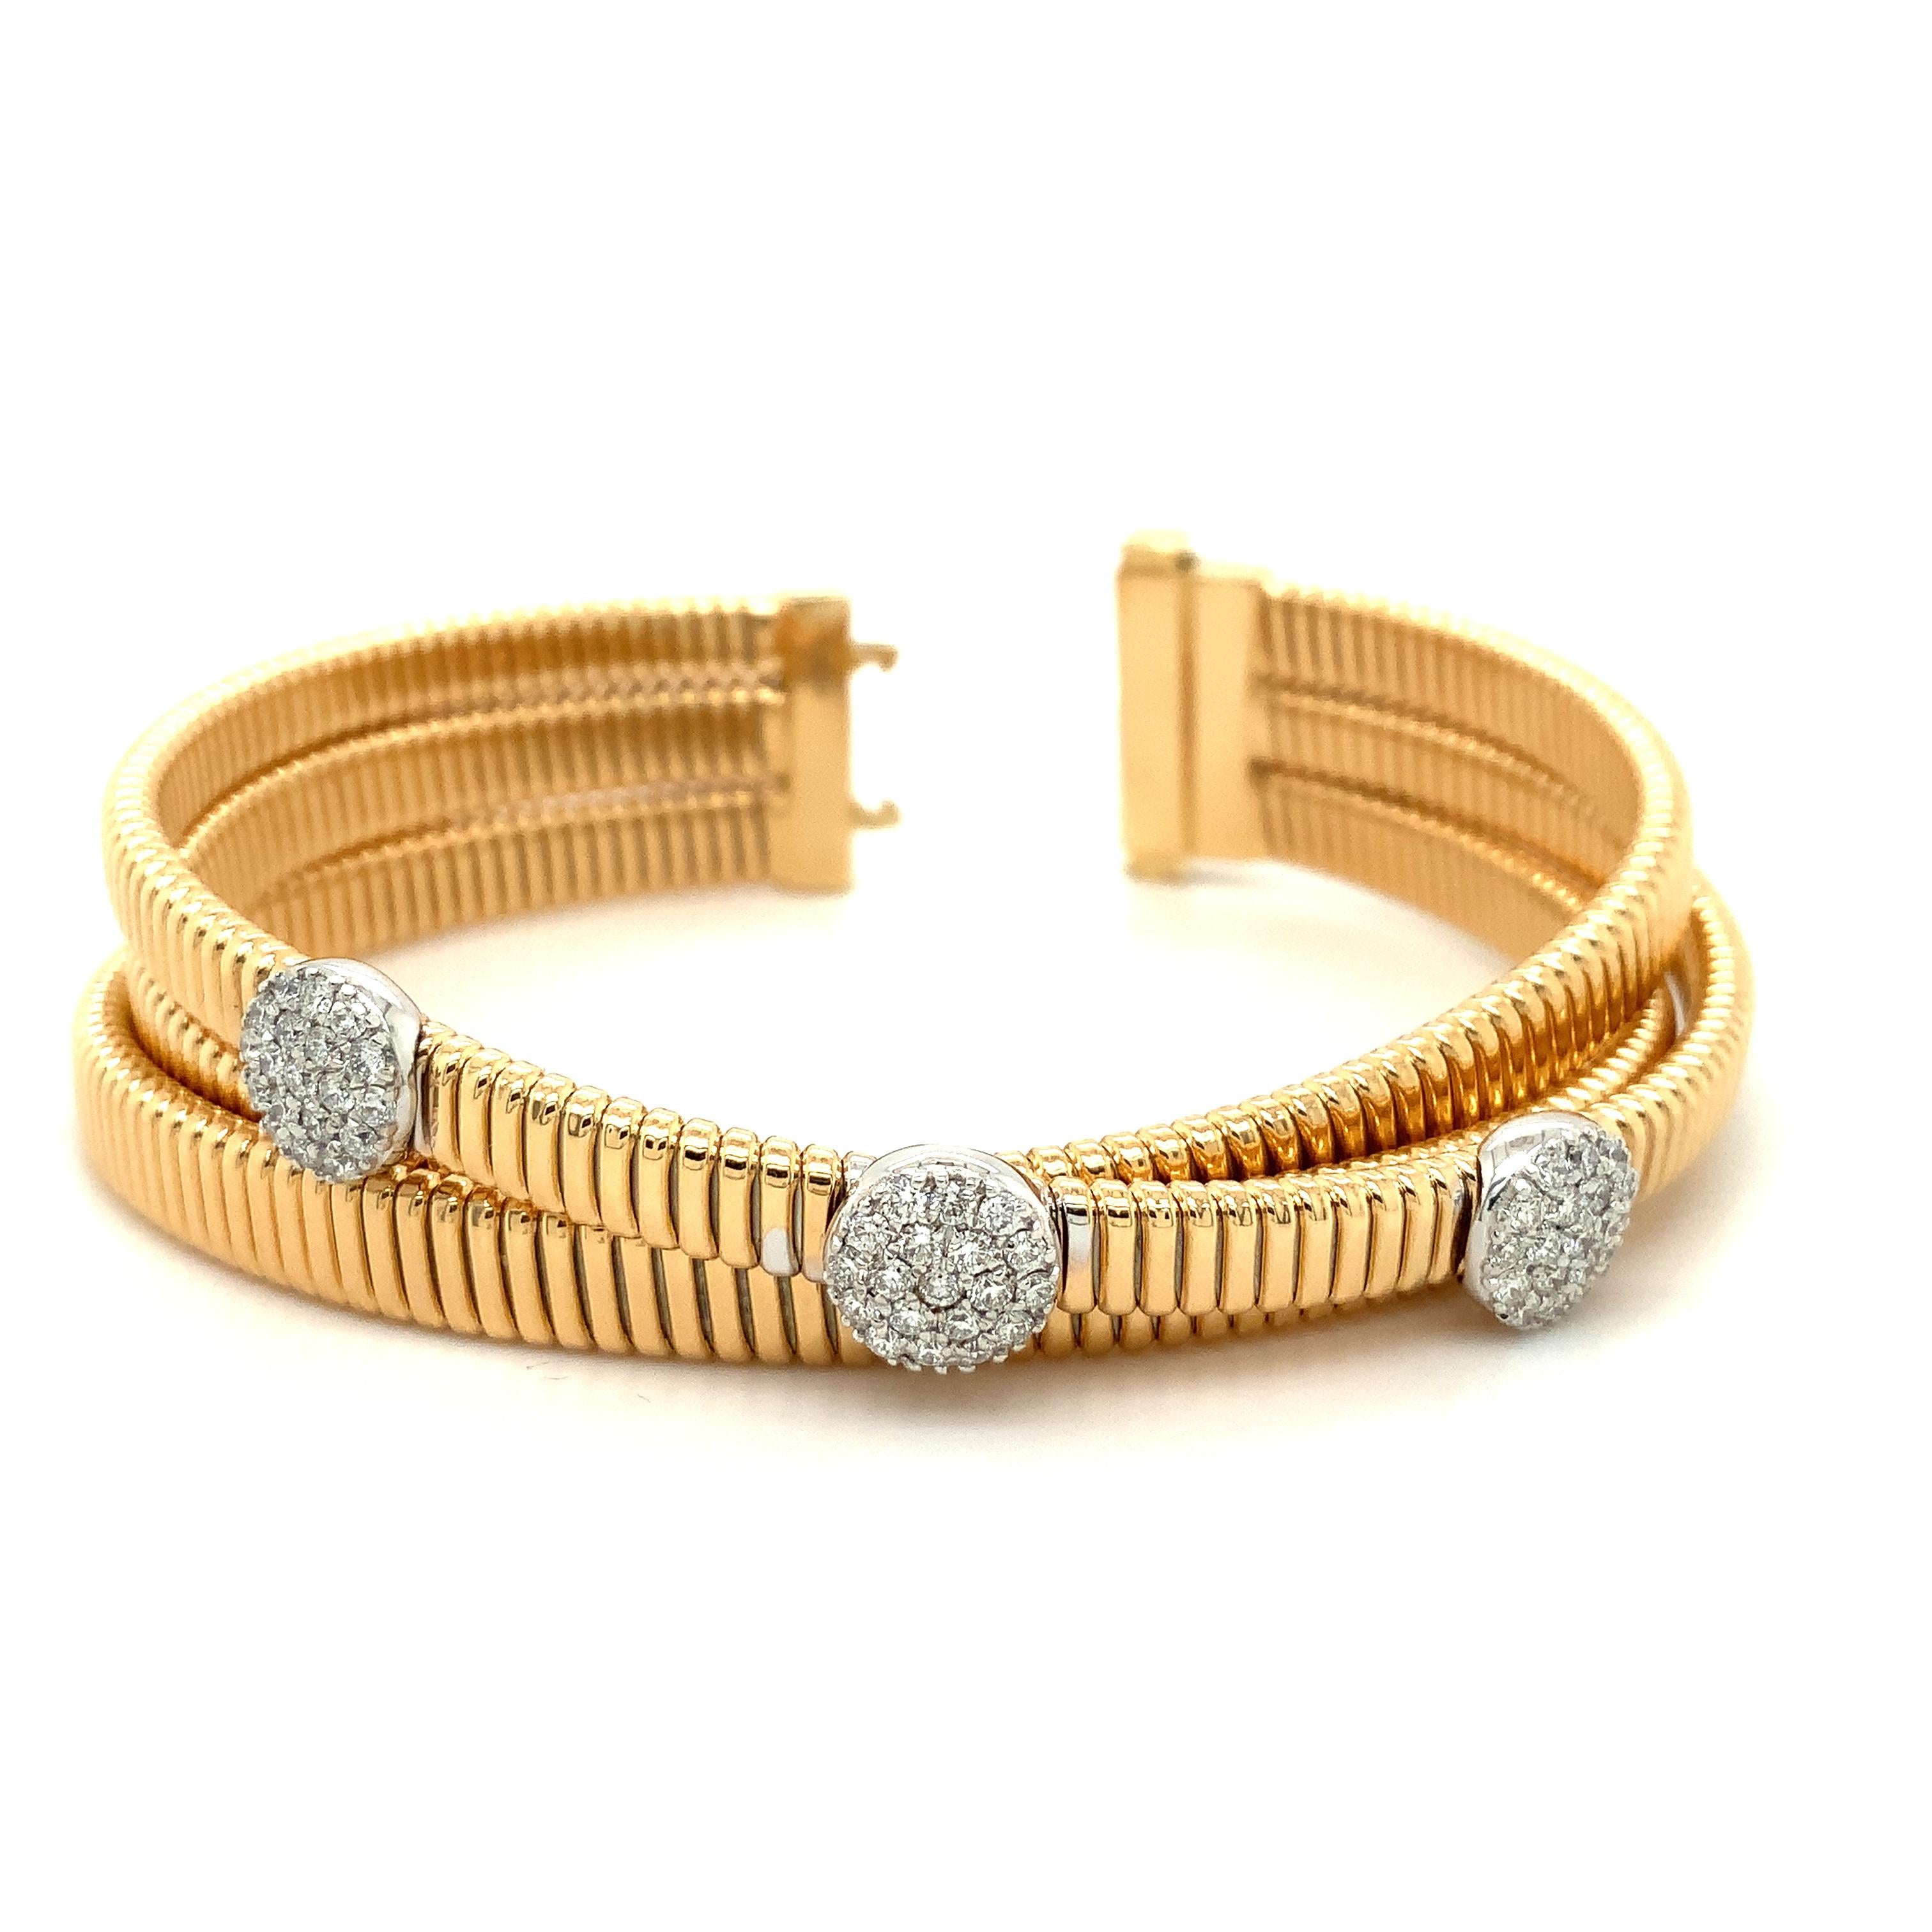 Afarin Collection Triple Flexi Pavé Diamond Bracelet Set in 18k Yellow and White In New Condition For Sale In Los Gatos, CA